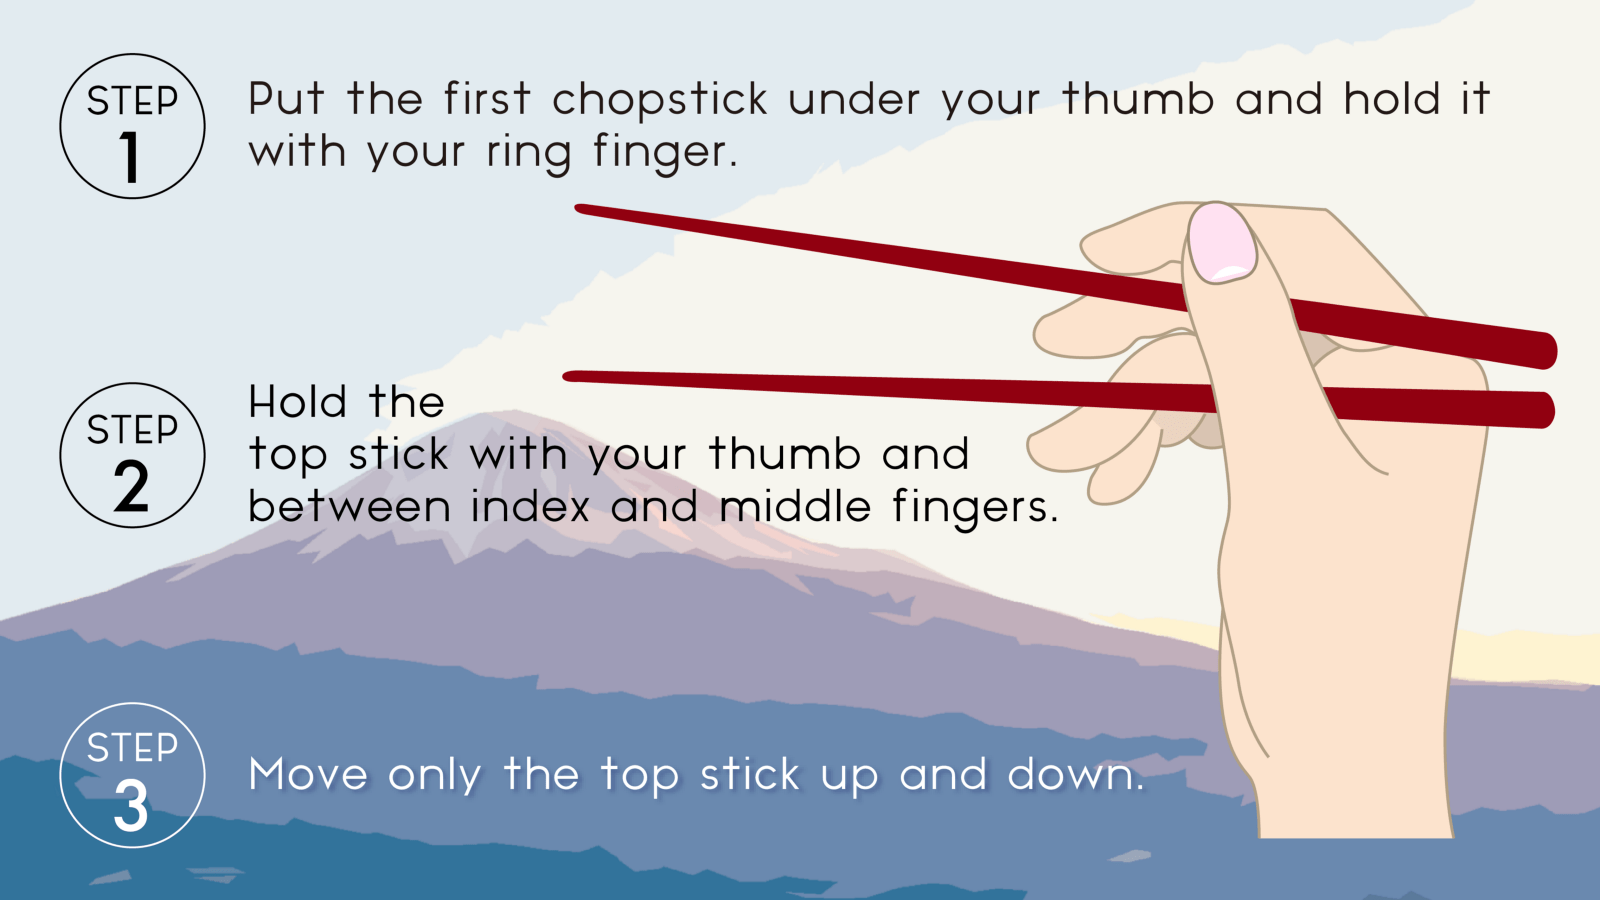 how to use the chopsticks properly